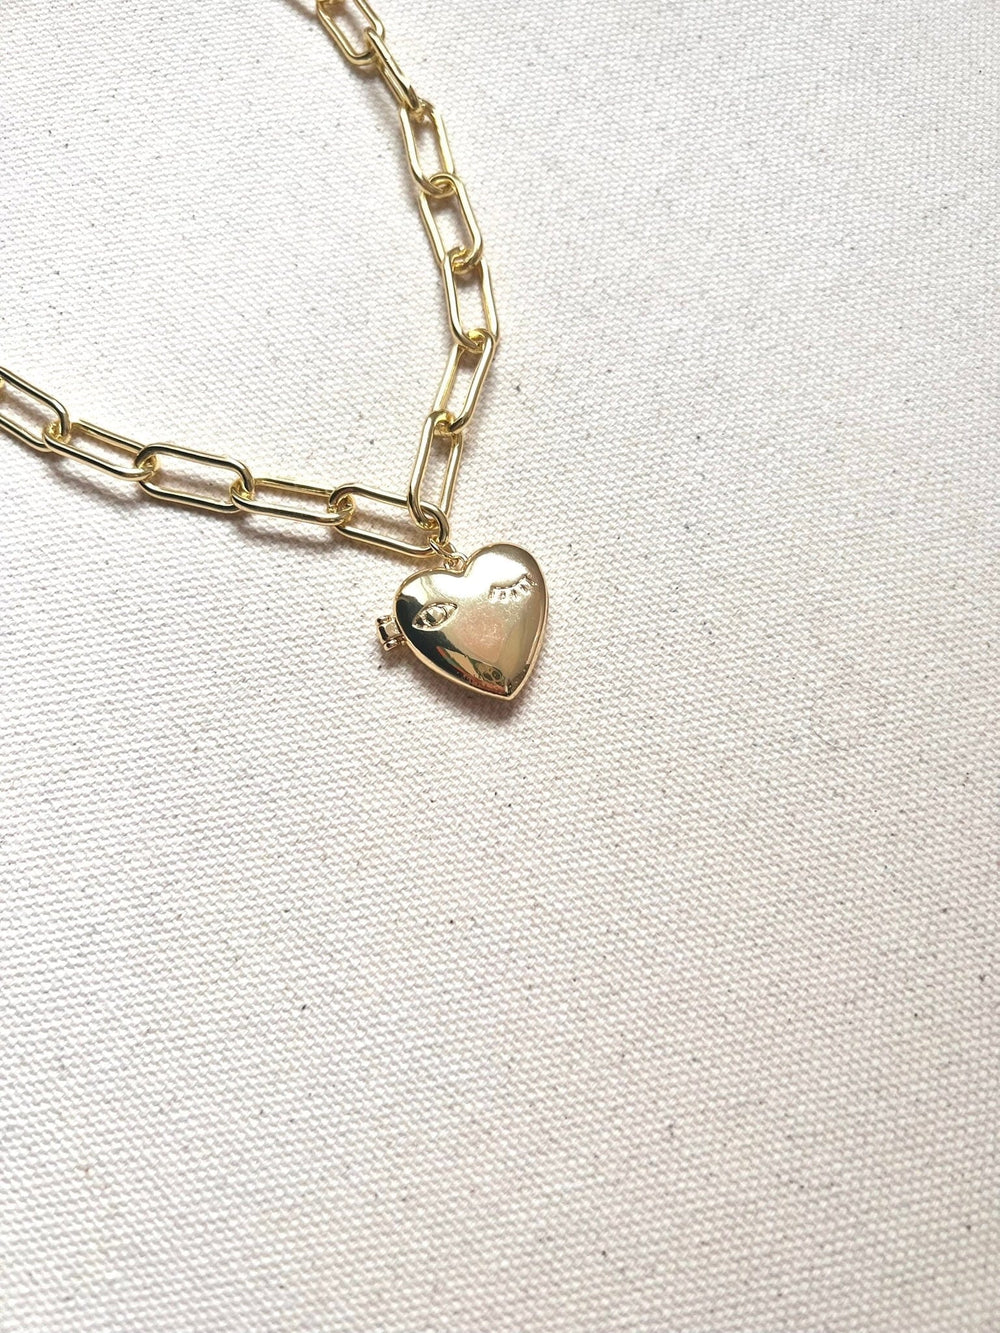 Wink Heart Locket Necklace Necklaces Style 2 - Chunky paperclip chain: 50cm (ca.19.5”) Necklace